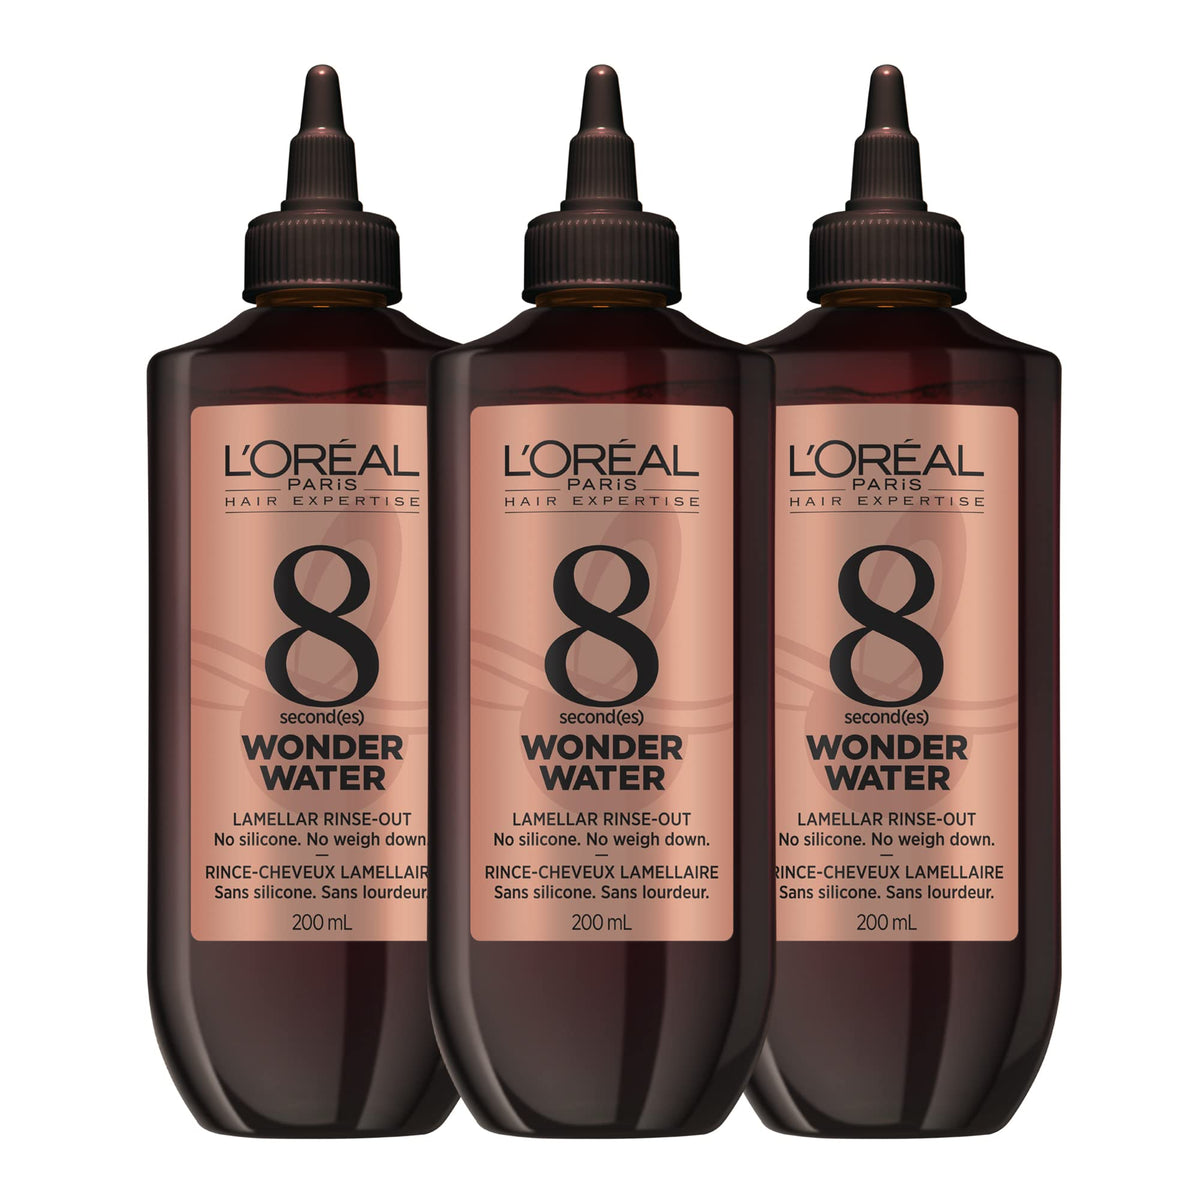 L'Oréal Paris 8-Second Wonder Water Lamellar Rinse Out Pack for All Hair Types, Infused with Protein to Resurface Damaged Hair Fibers, Silicone Free, 3x200ml